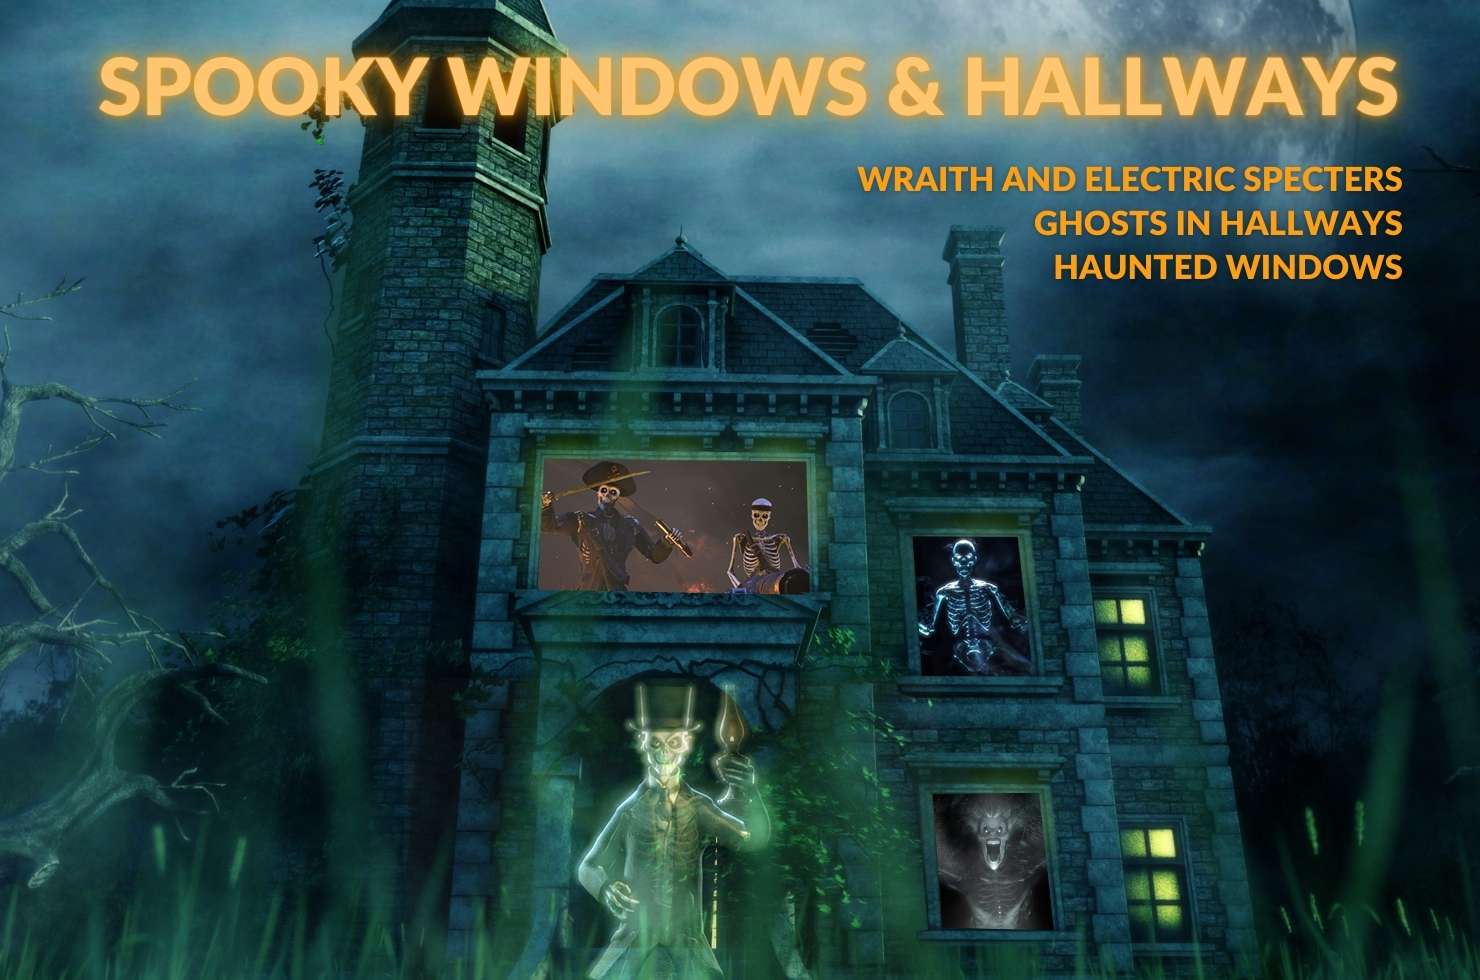 Image of a haunted house with Ghosts, Specters in the window, setup anywhere.